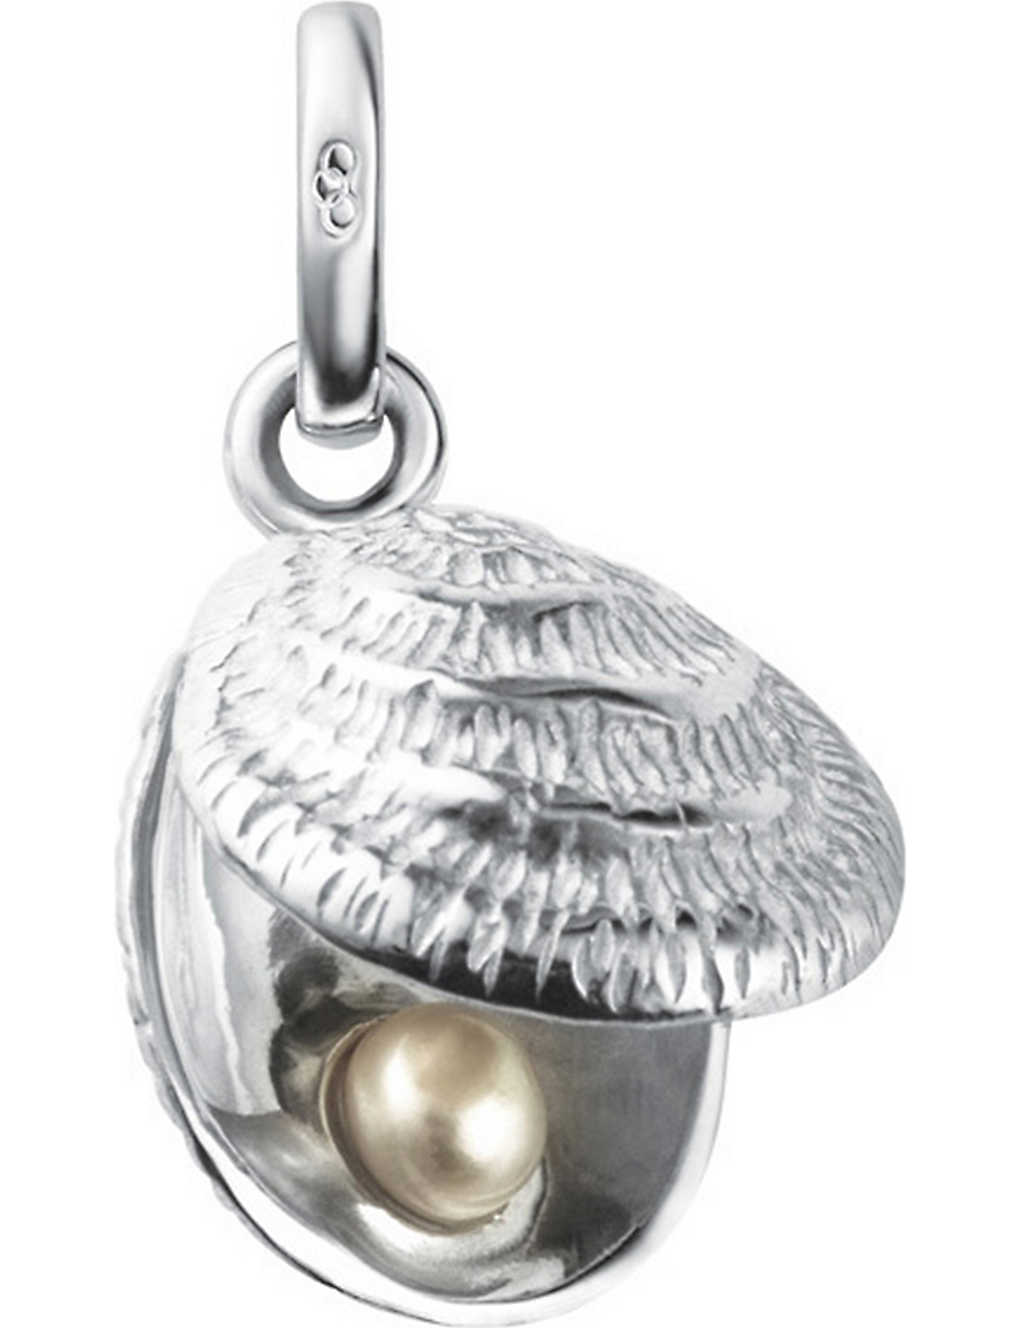 LINKS OF LONDON LUCKY CATCH STERLING SILVER SHELL CHARM,705-10016-50300414